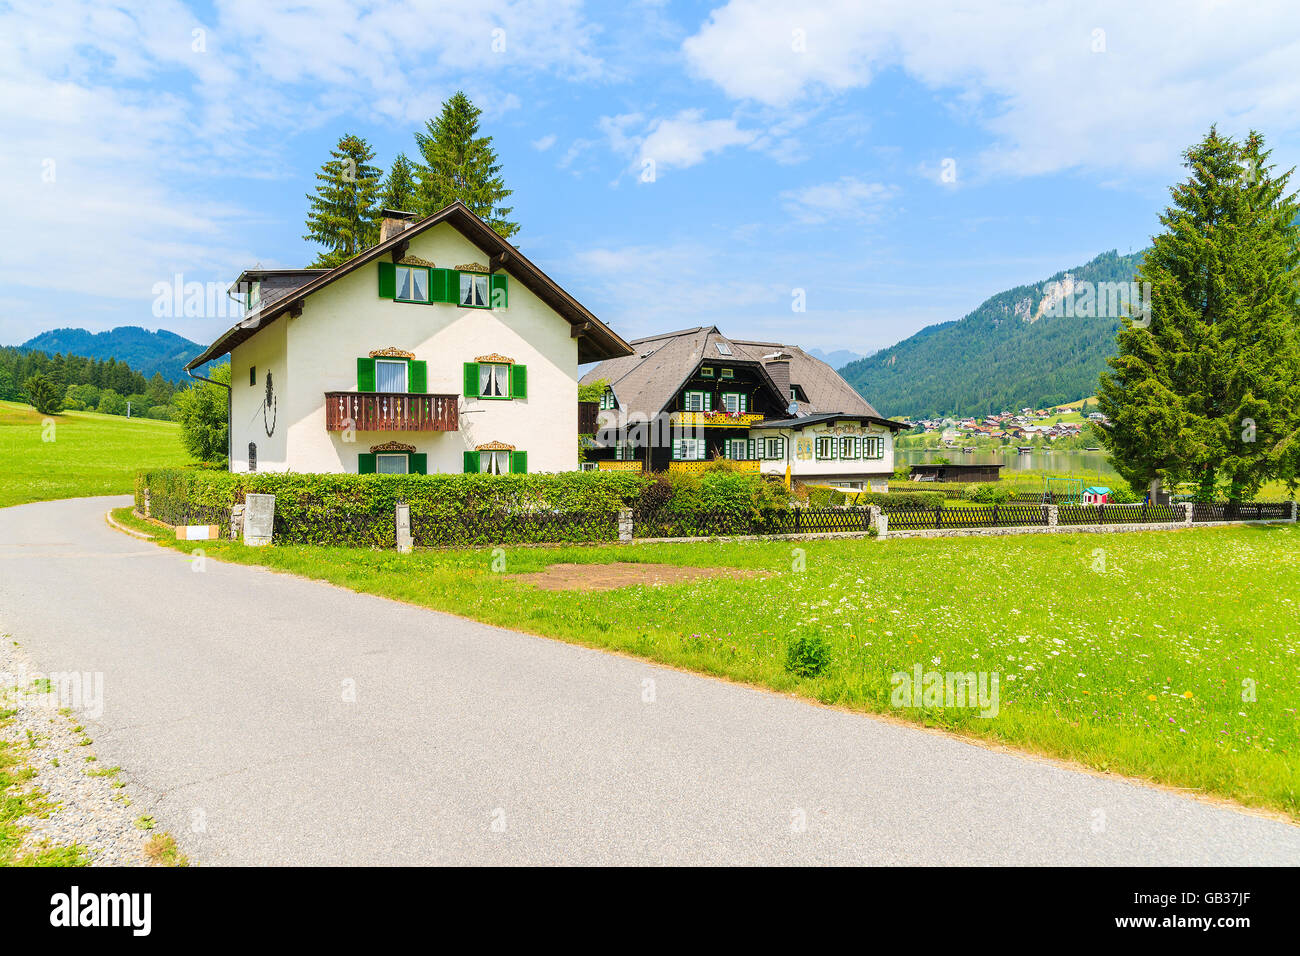 Walking lakeside promenade with view of typical alpine mountain houses in summer landscape of Weissensee lake, Austria Stock Photo